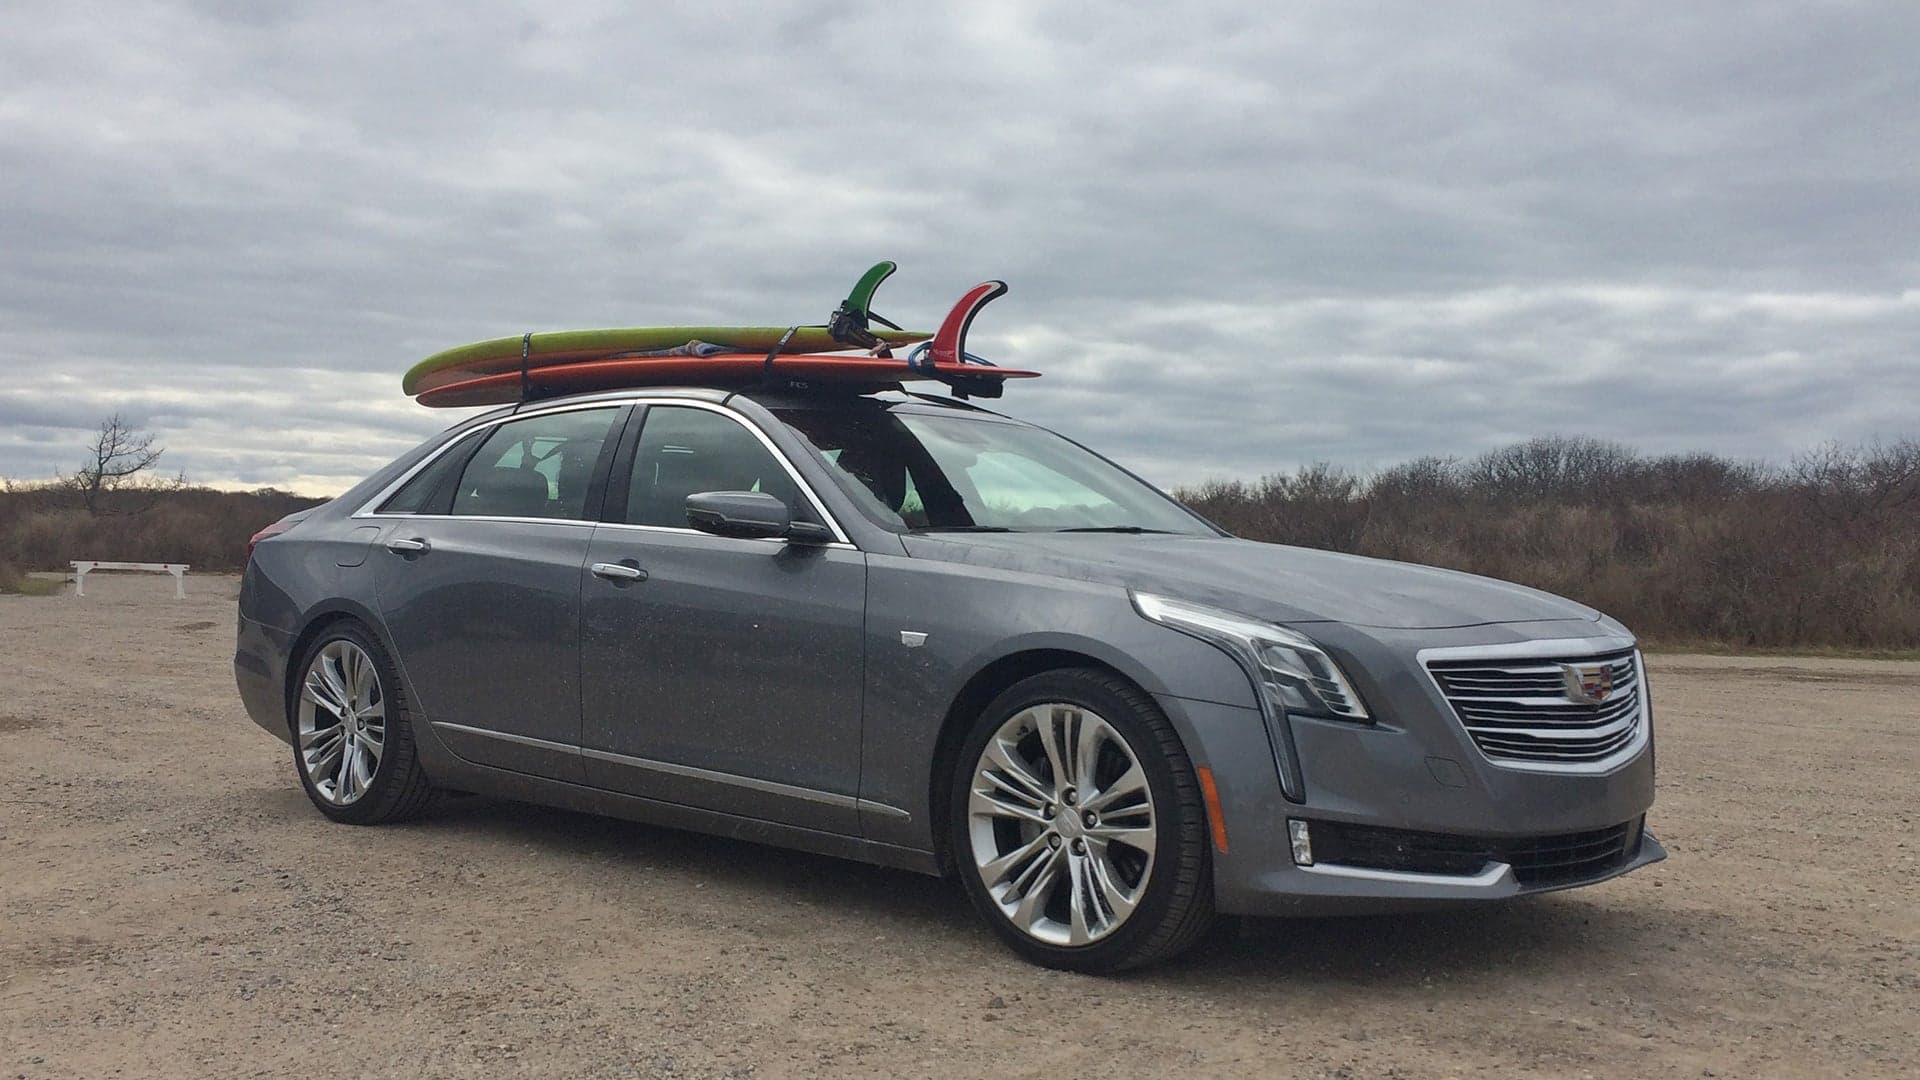 2018 Cadillac CT6 New Dad Review: A Big, Comfy Sedan Serves Up Rest for a Weary Poppa